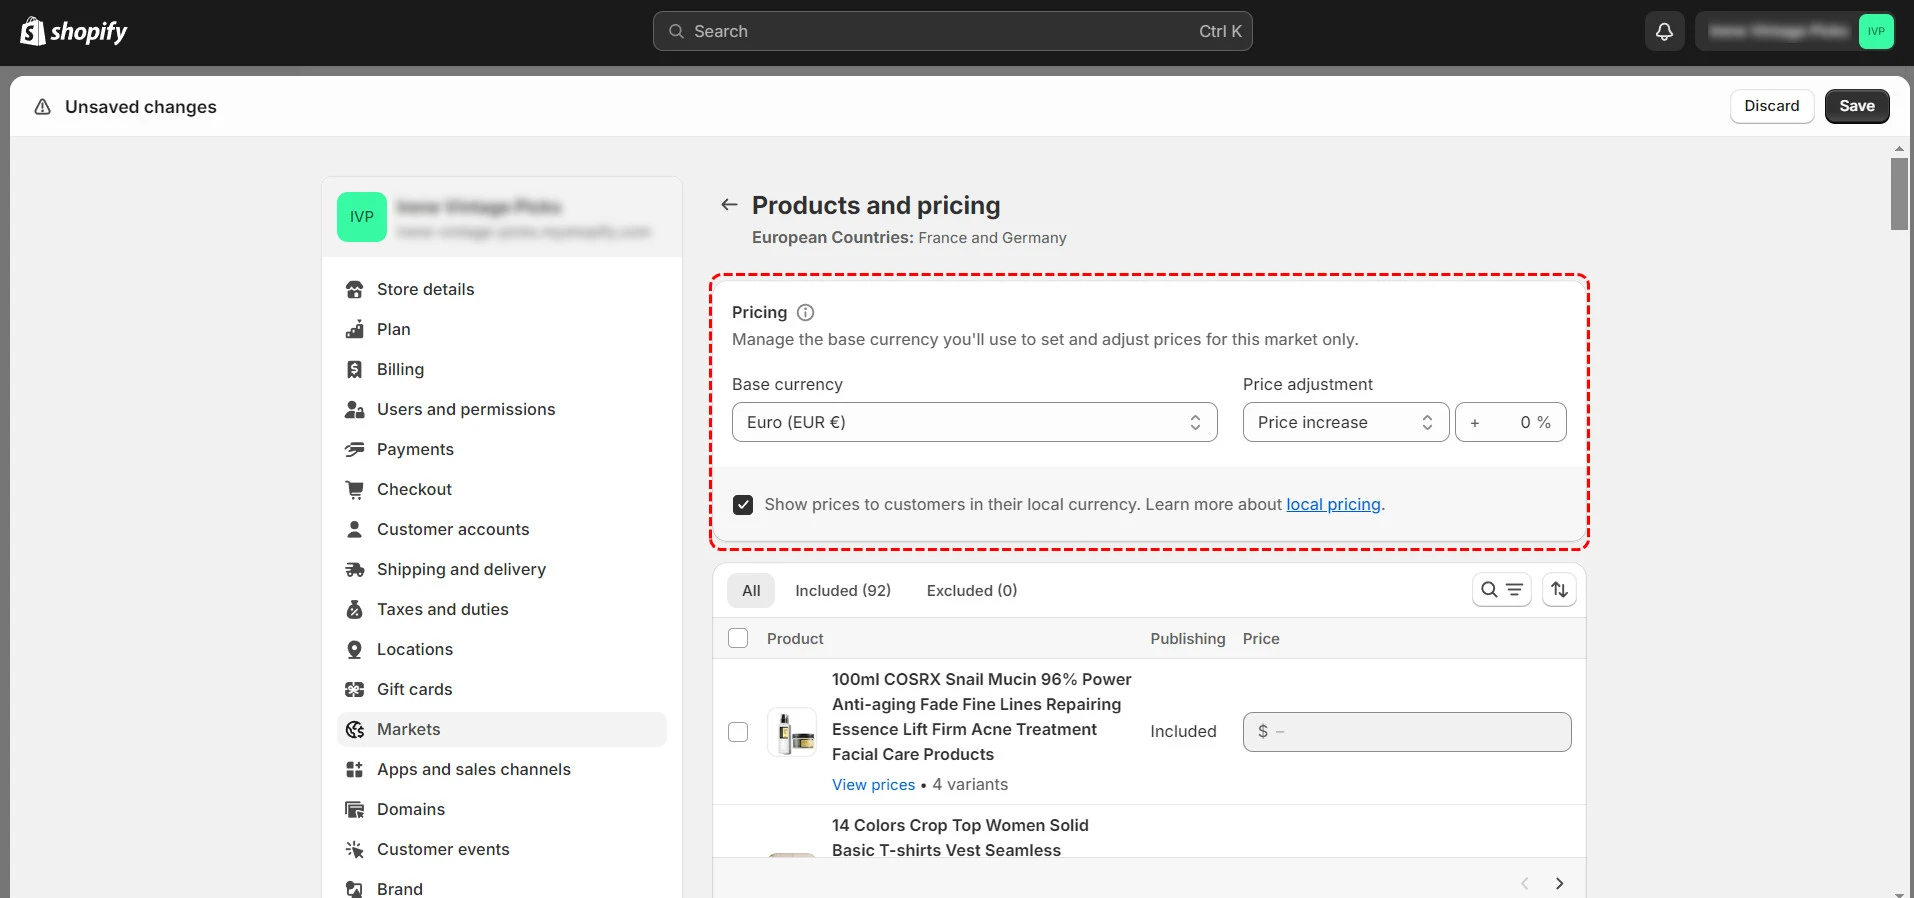 shopify markets products and pricing screen